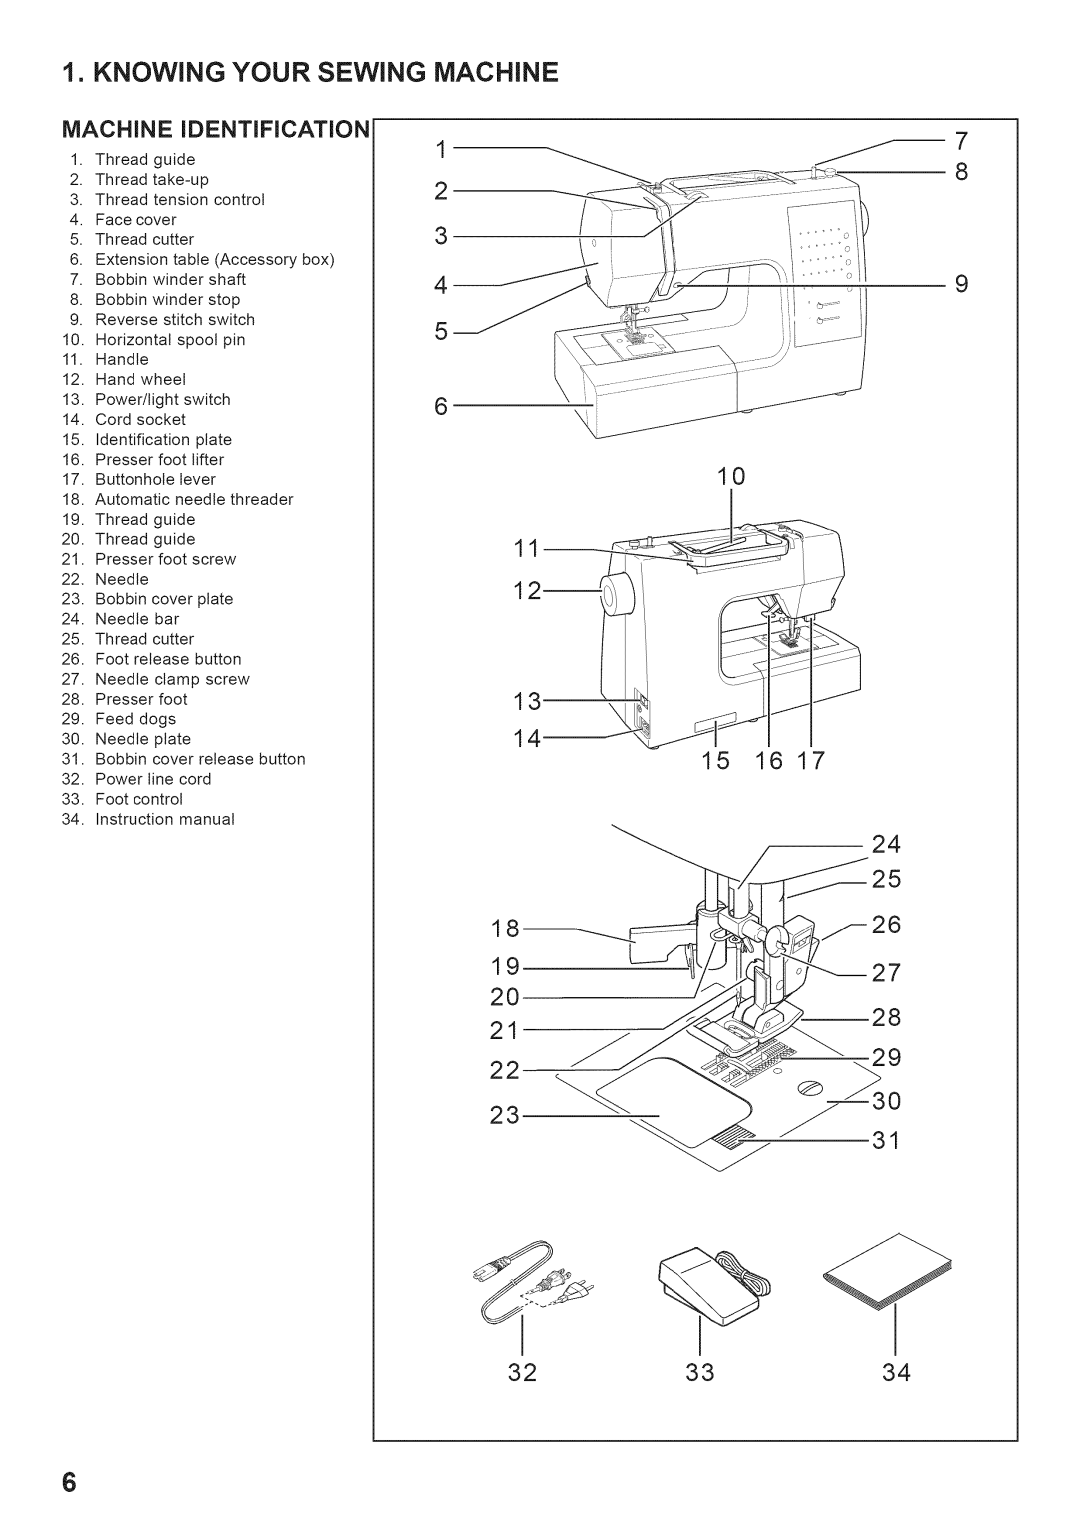 Singer 7442 manual Knowing Your Sewing Machine, 323334, MACHINE iDENTiFiCATiON 